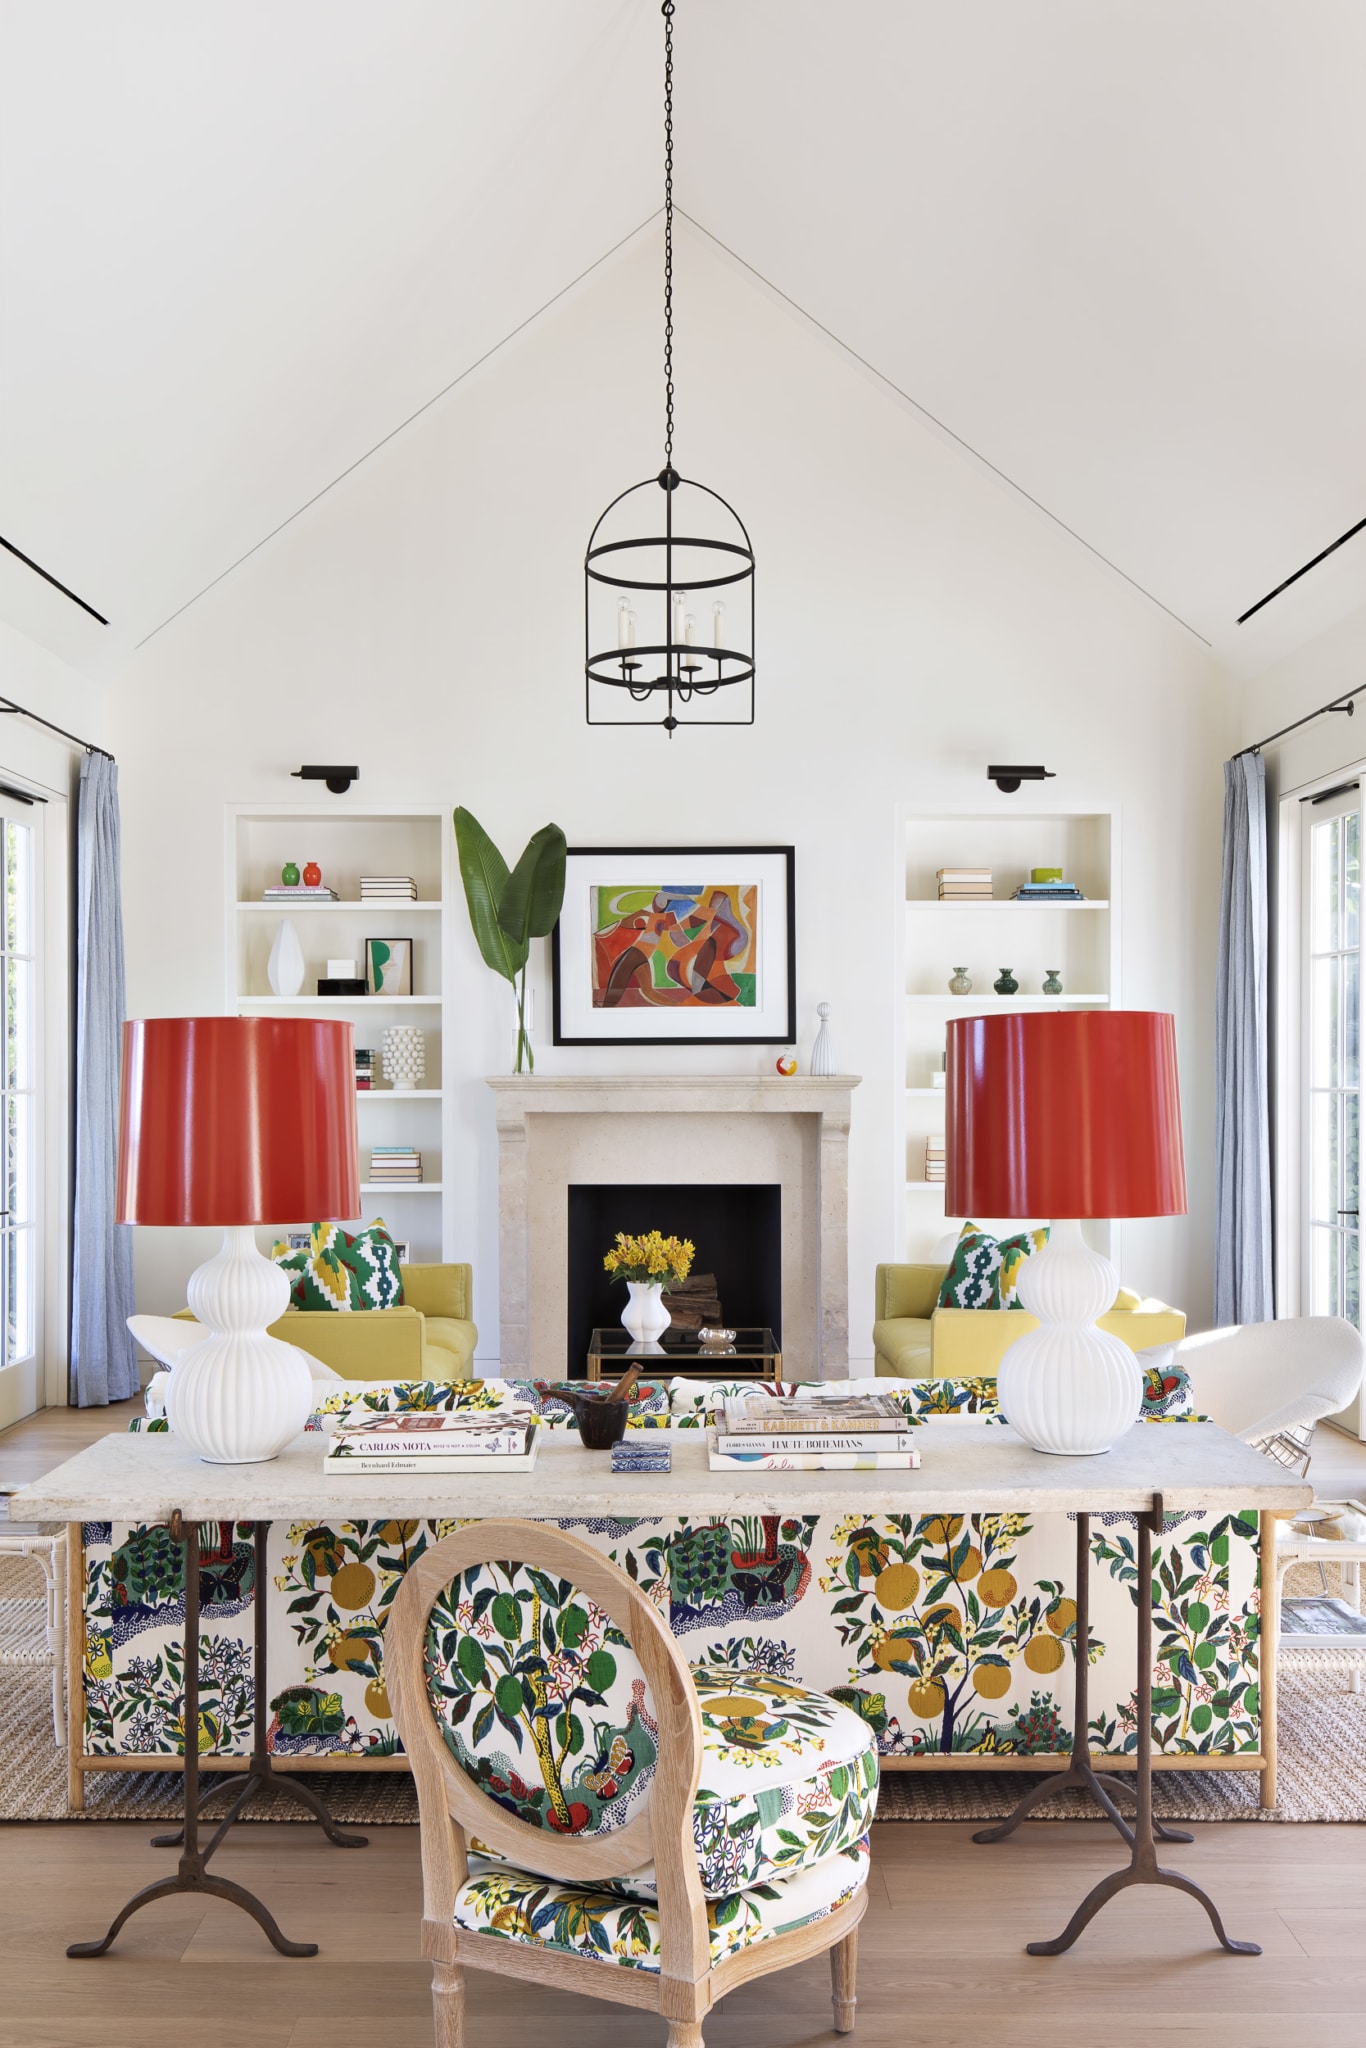 The architecture and design of Windsor a Vero Beach community - beachside - Jessica Glynn Photography - Hadley Keller Author - Vendome press - colorful living room with cathedral ceiling